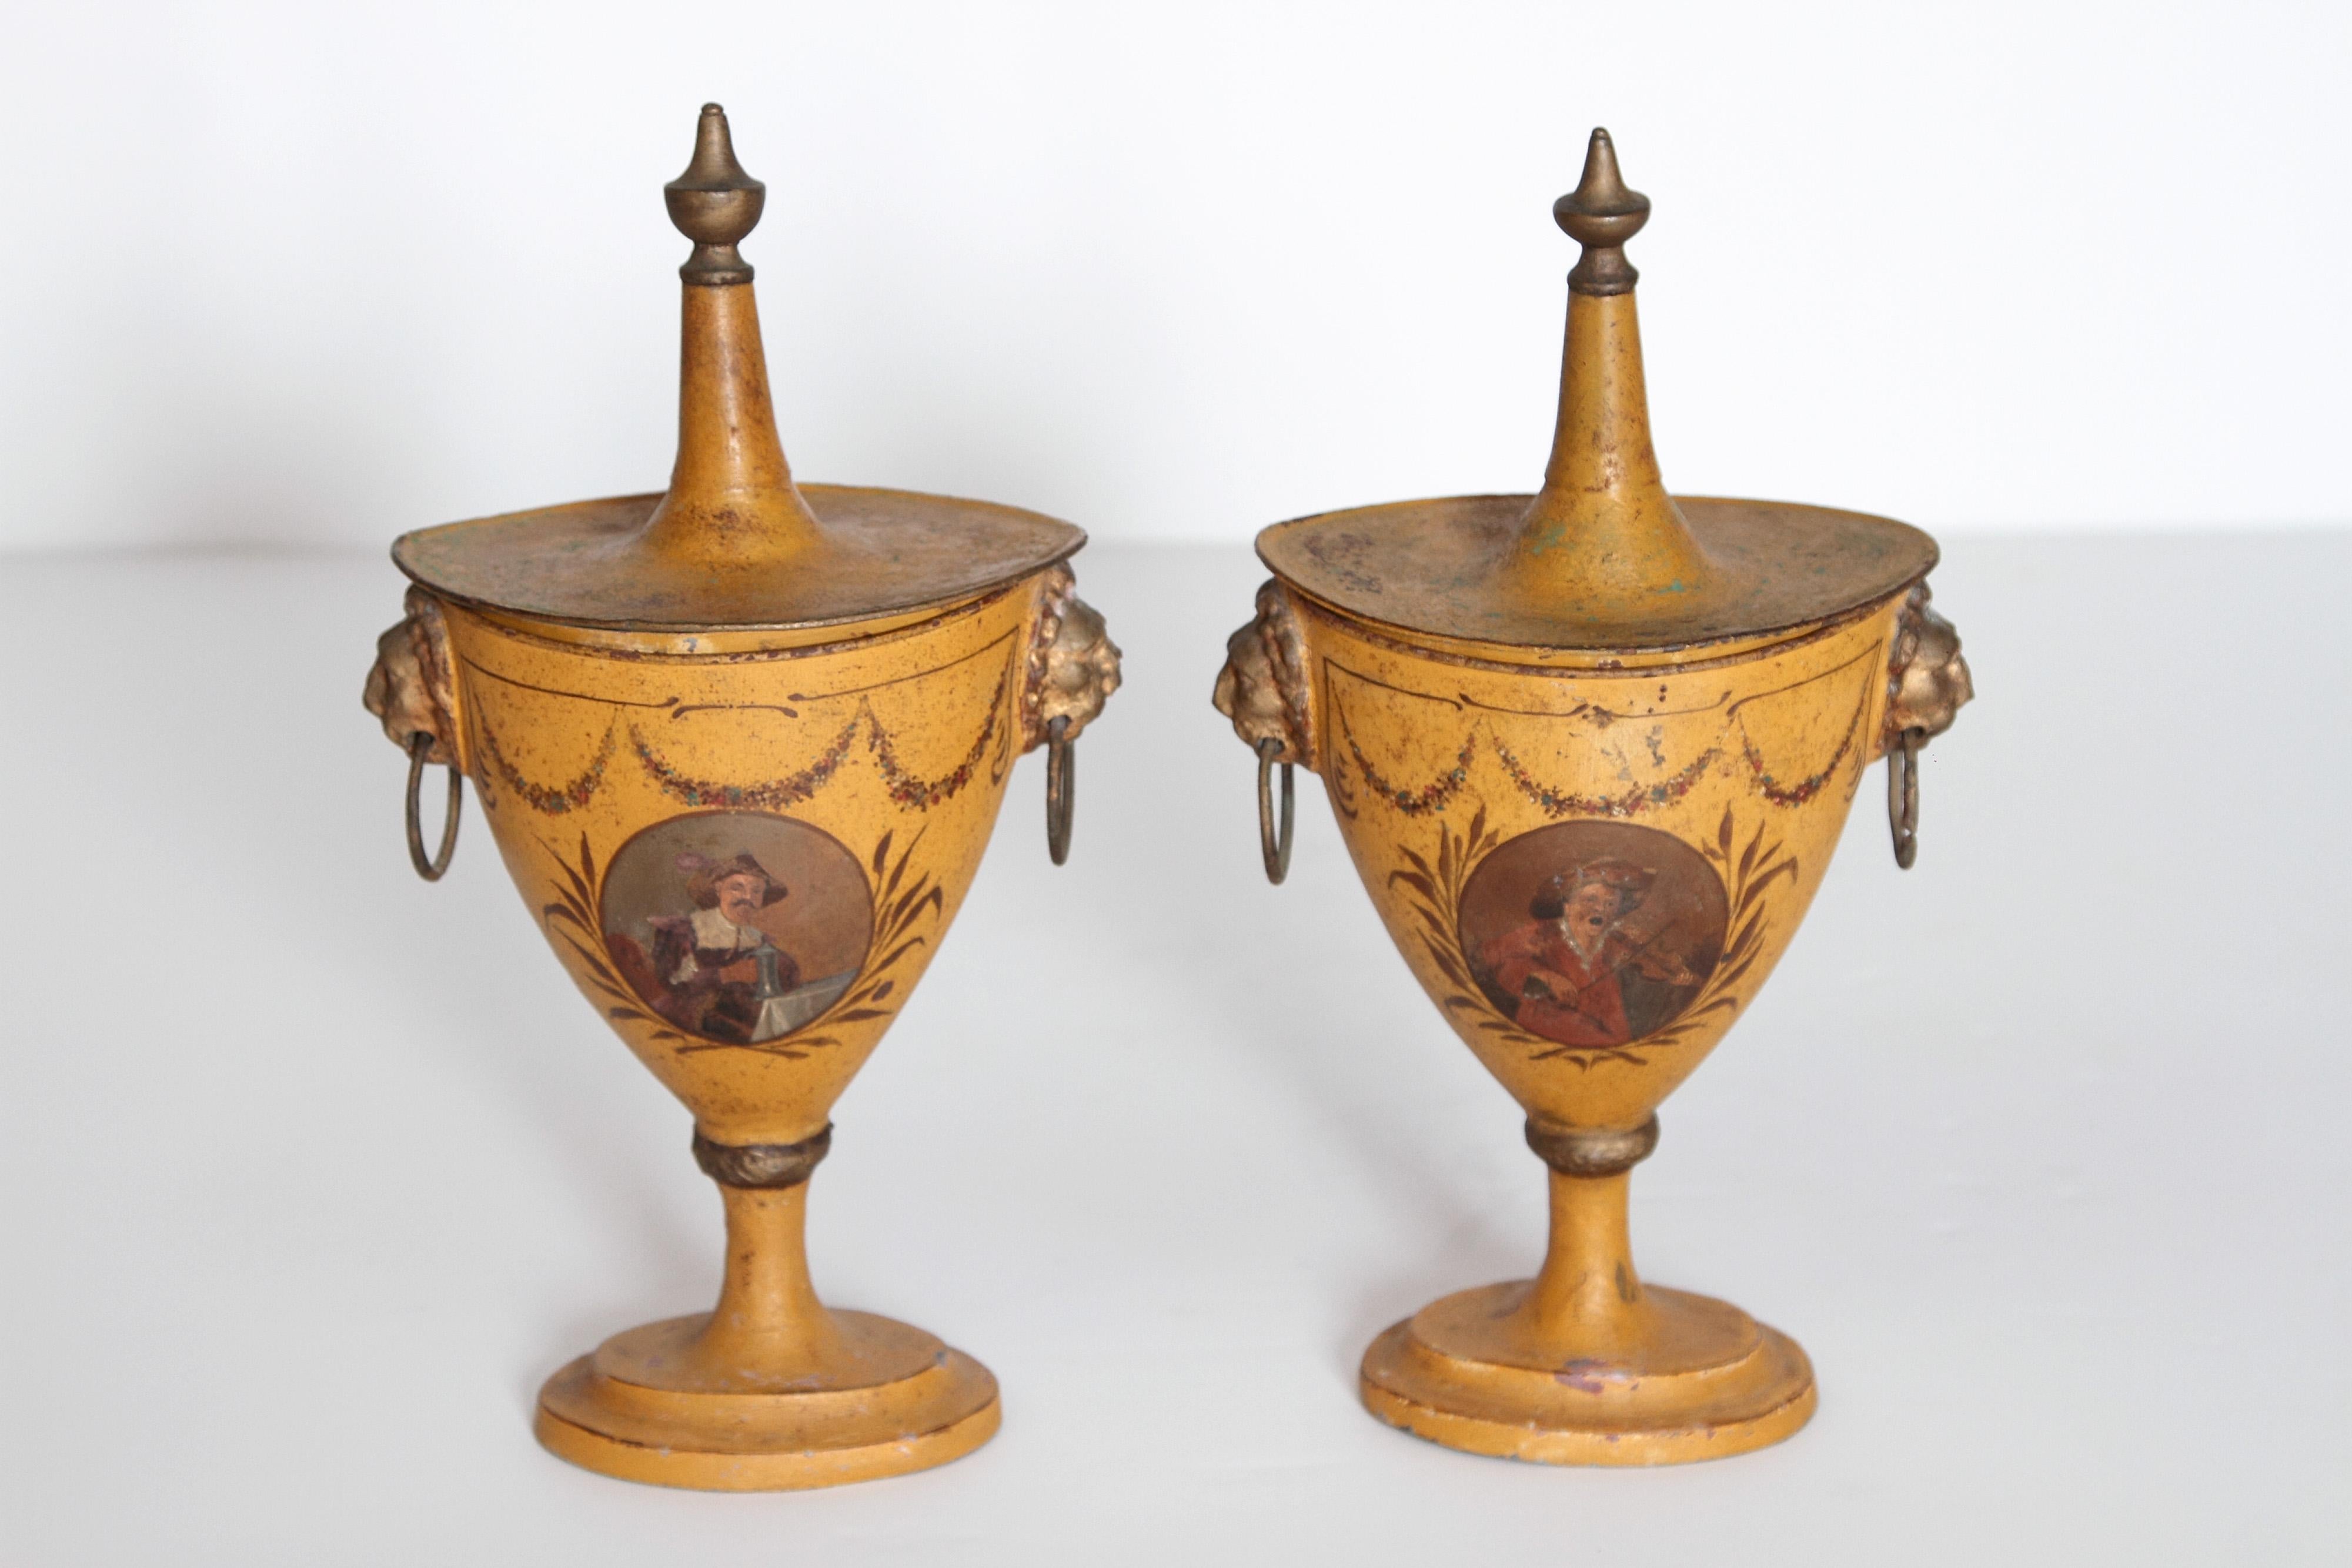 Pair of English Regency Tole Painted Chestnut Urns (Metall)